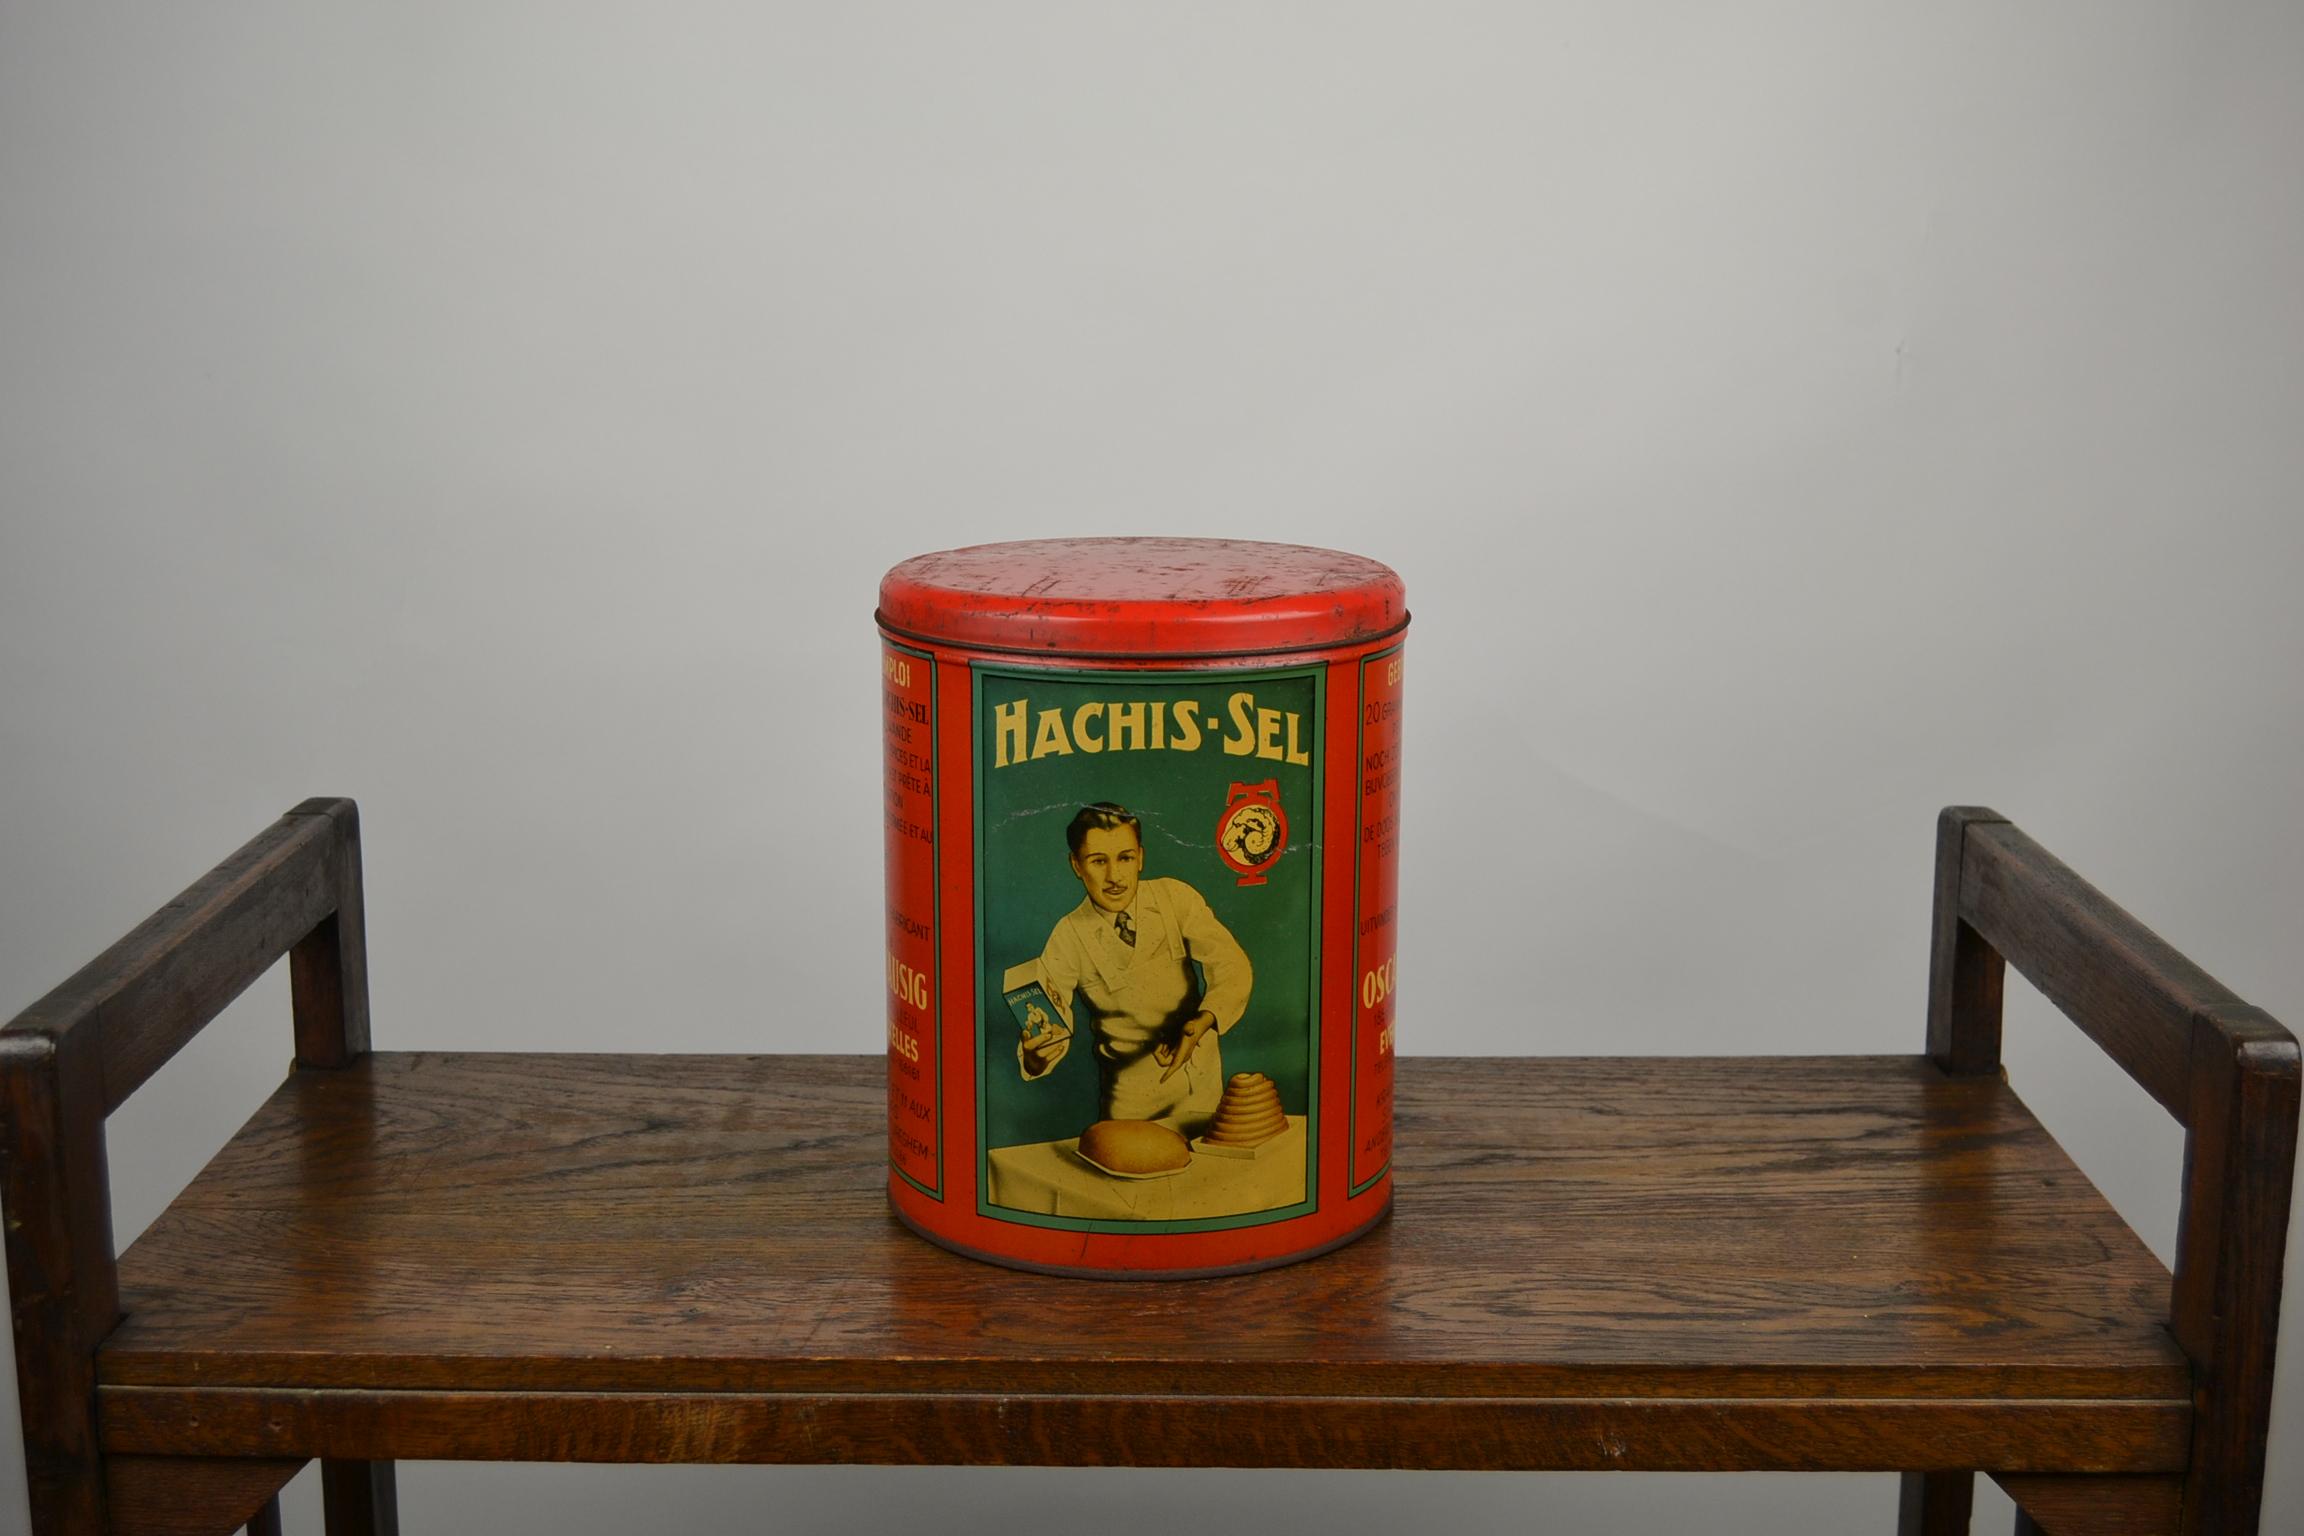 1950s Belgian Tin Box, Decorative Box. 
This Vintage Tin was made for Hachis Sel, the brand of professional spices made by the house Tausig since 1937. 
They were only distributed to abbatoirs and butcher shops. 
Great decorative box for the